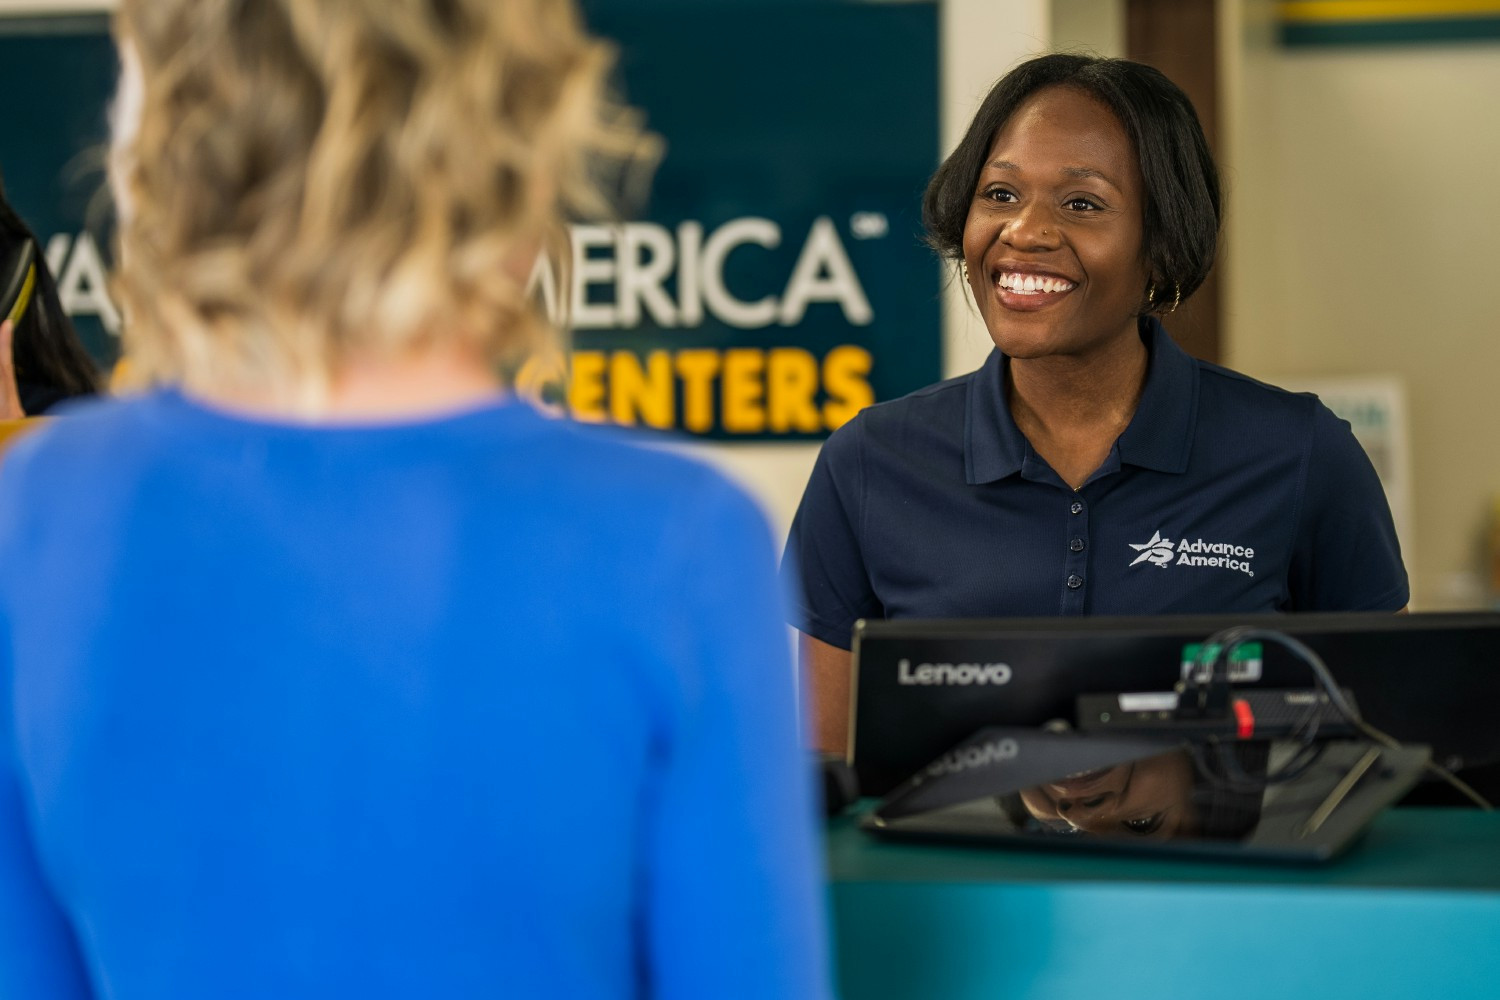 Friendly faces, Helpful Solutions: Going the extra mile for our customers